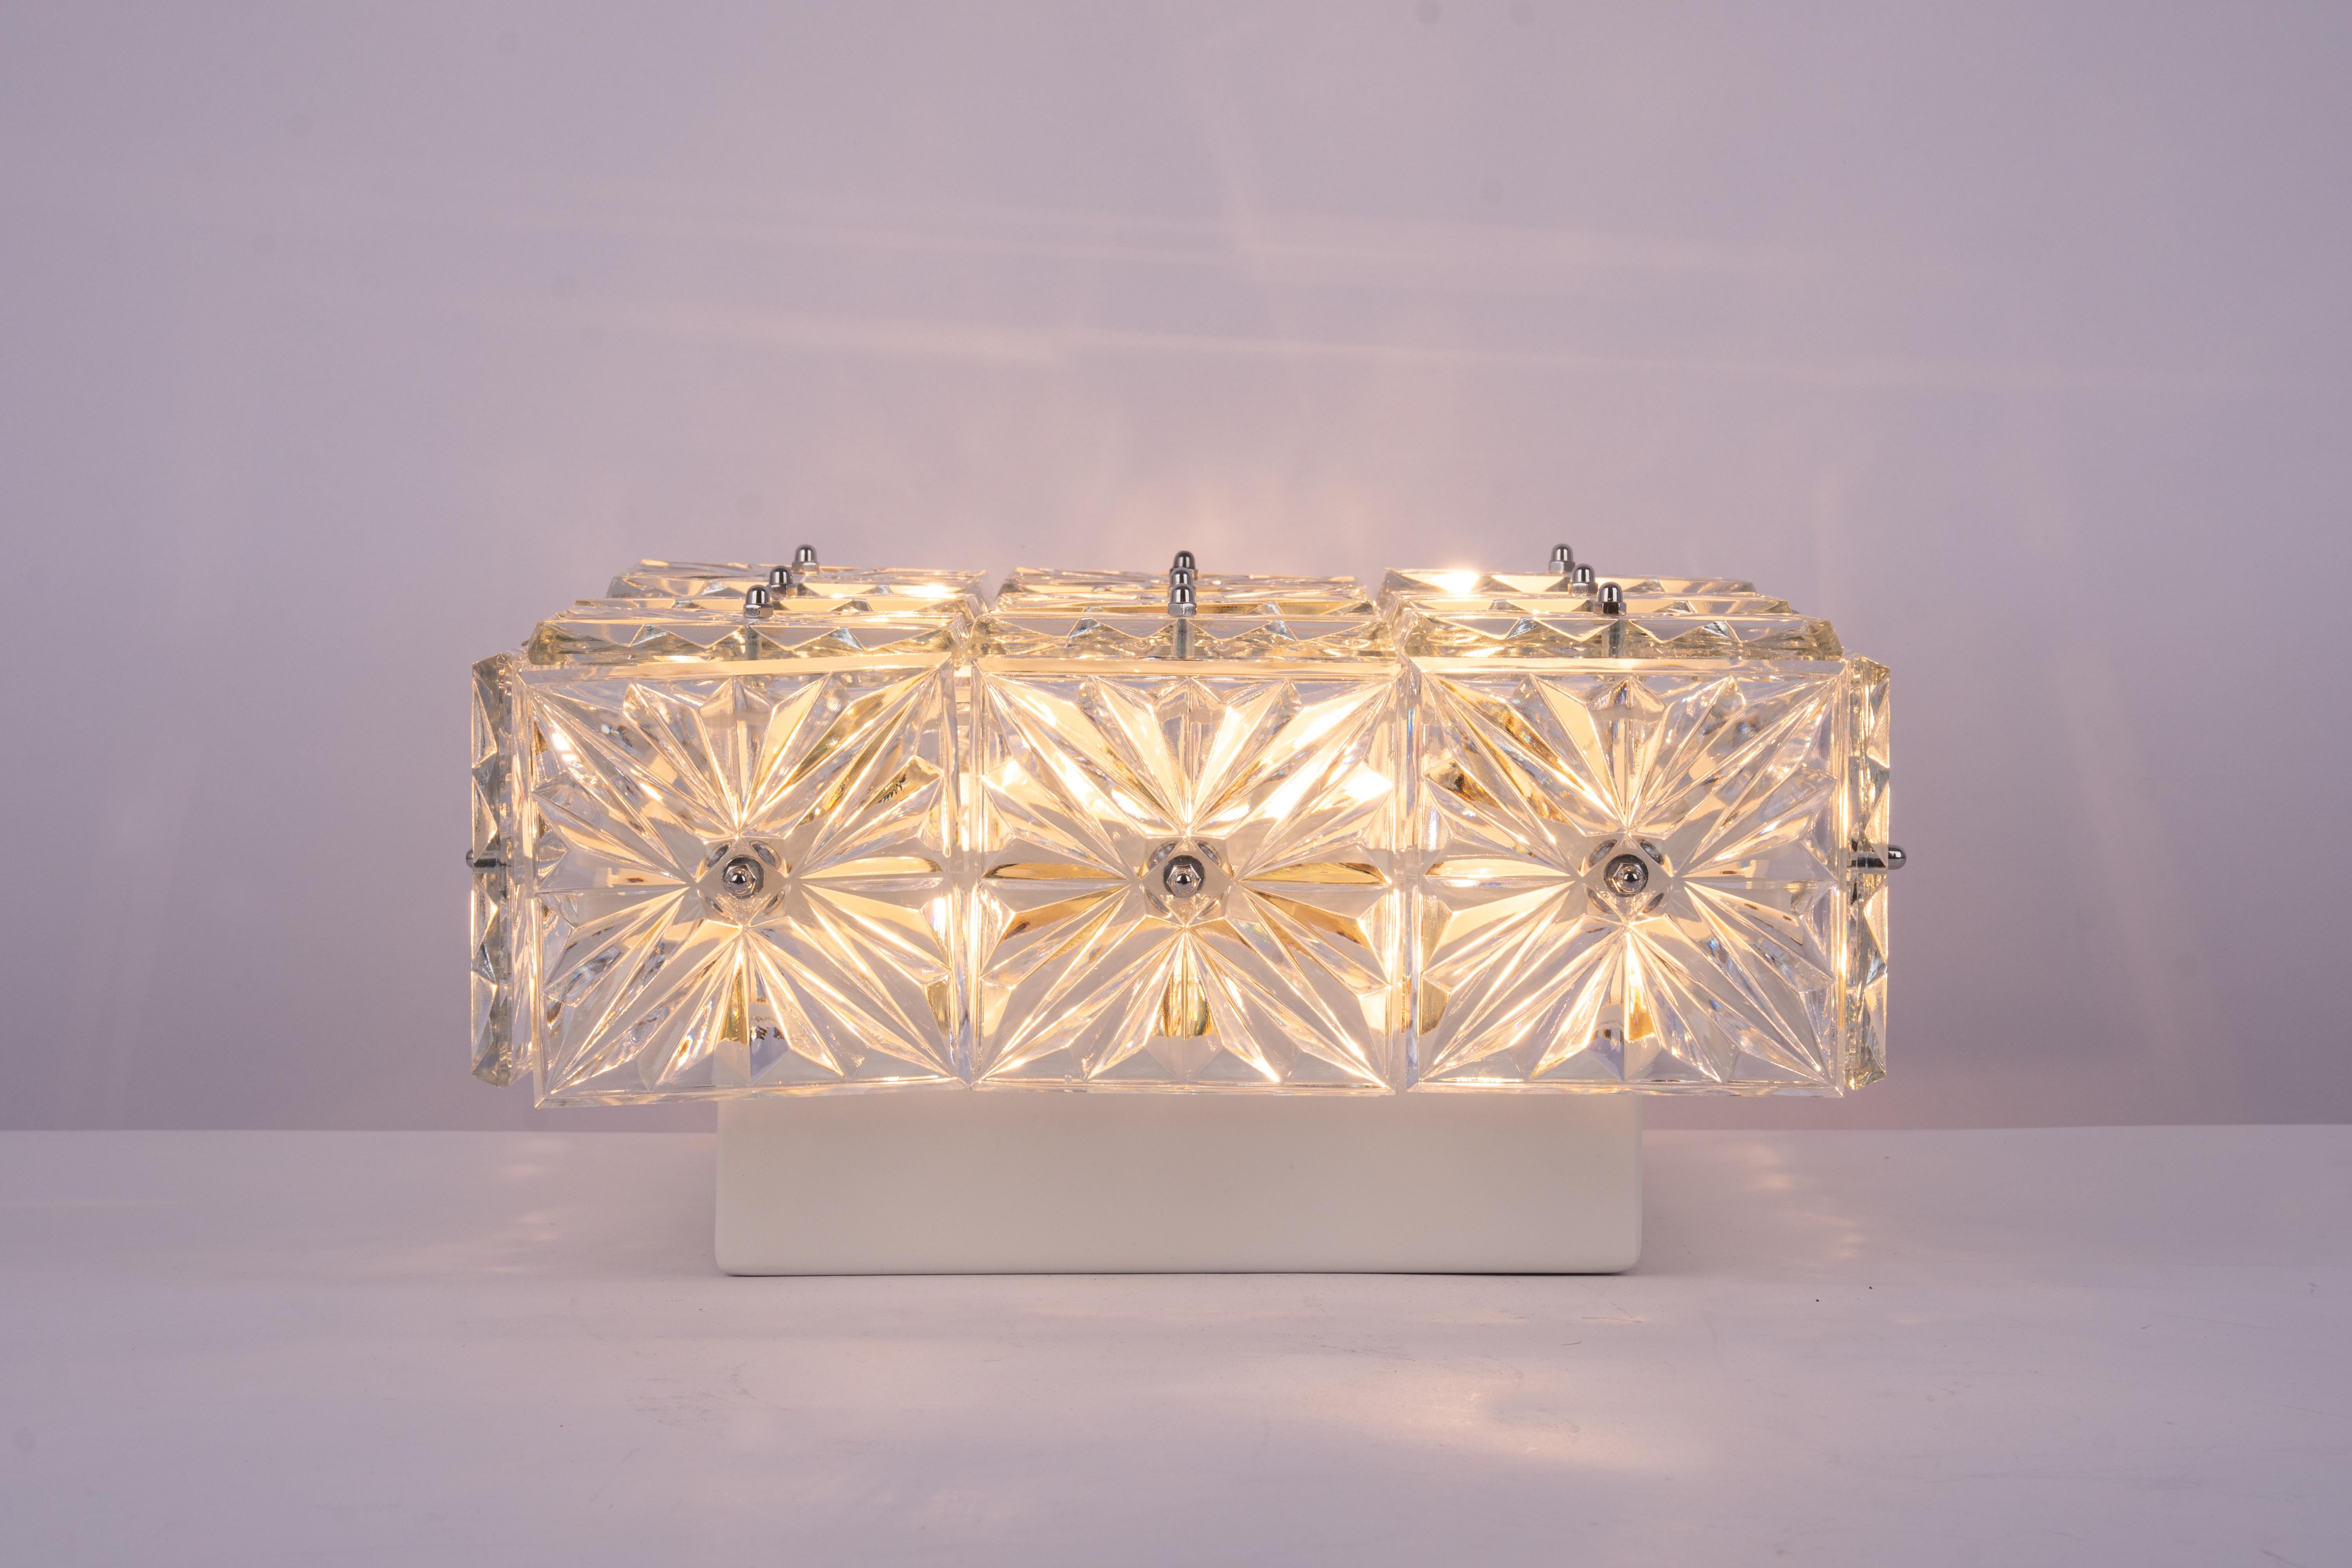 1 of 4 Large Flushmount Faceted Crystal Light Fixture, Germany, 1960s For Sale 1